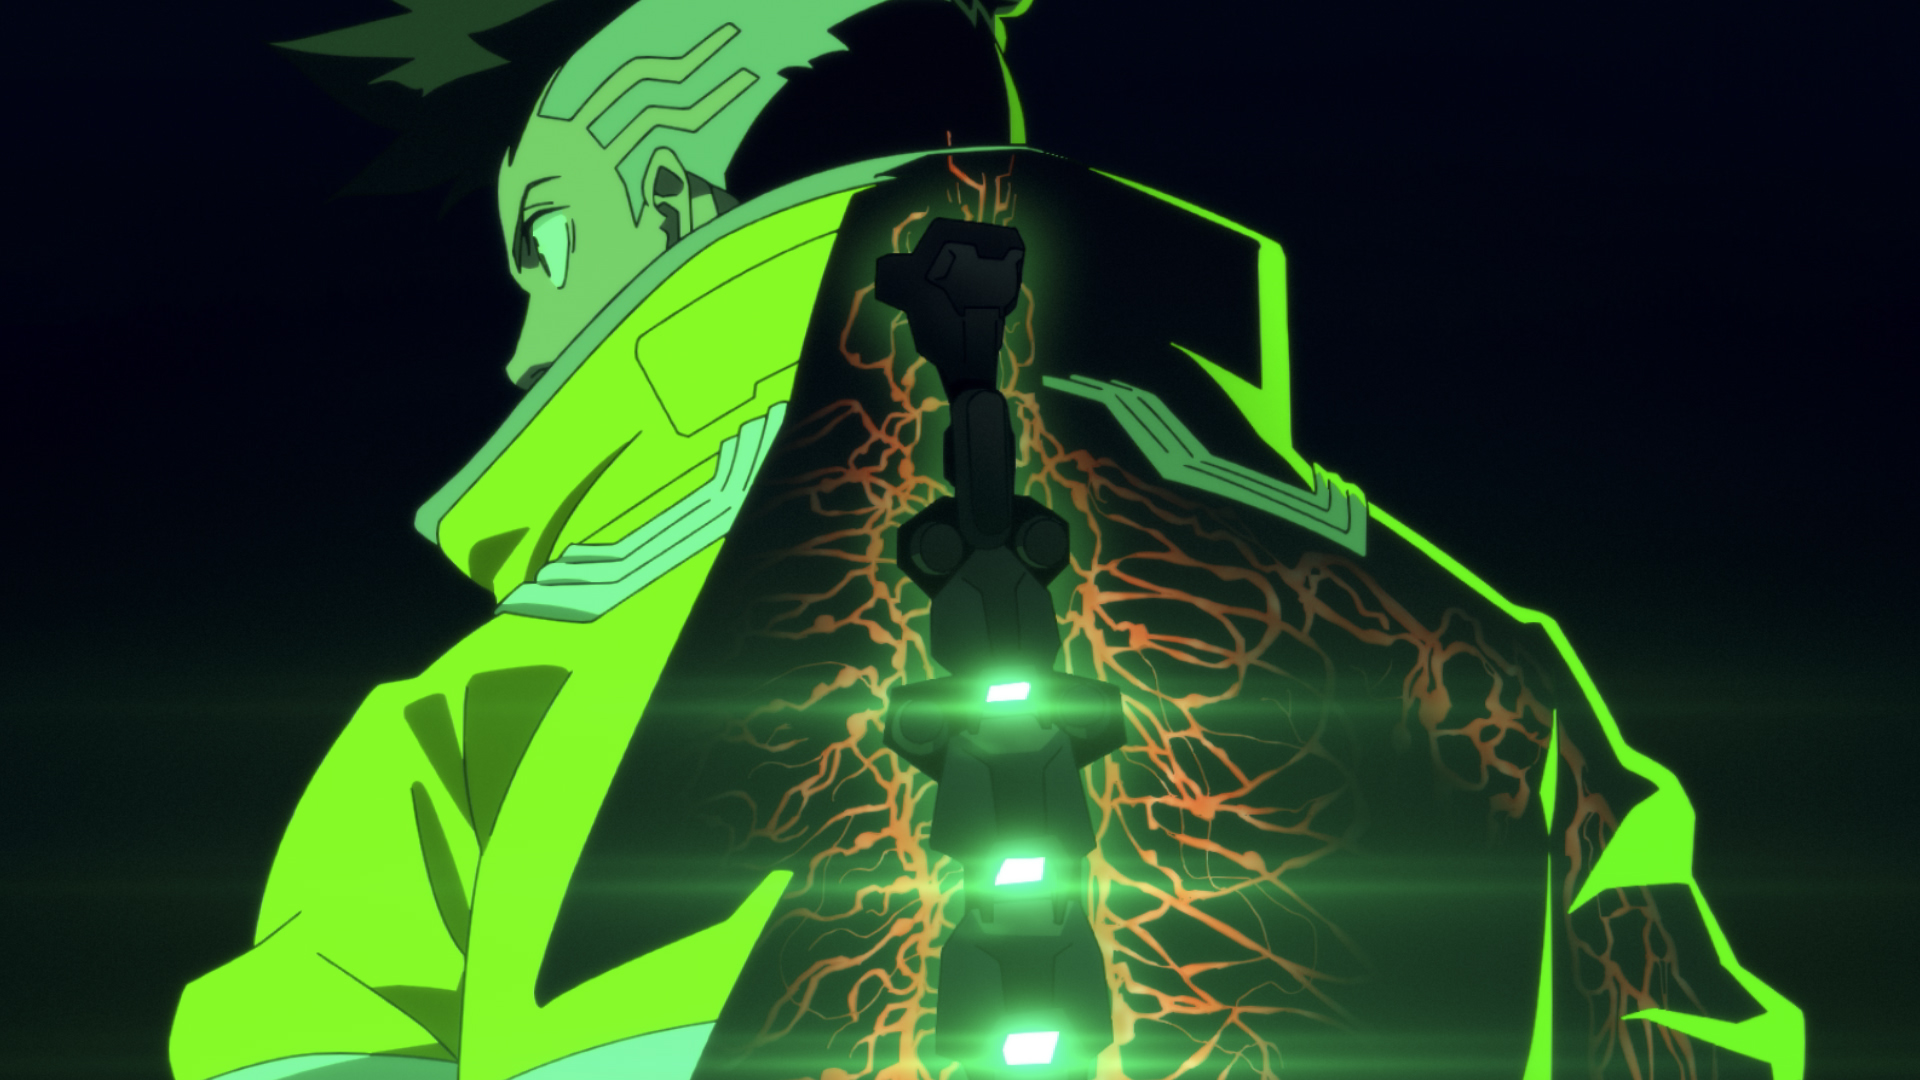 A shot of David from behind, with his robot spine lighting up and illuminating red nerves out from under it, from the anime Cyberpunk Edgerunners